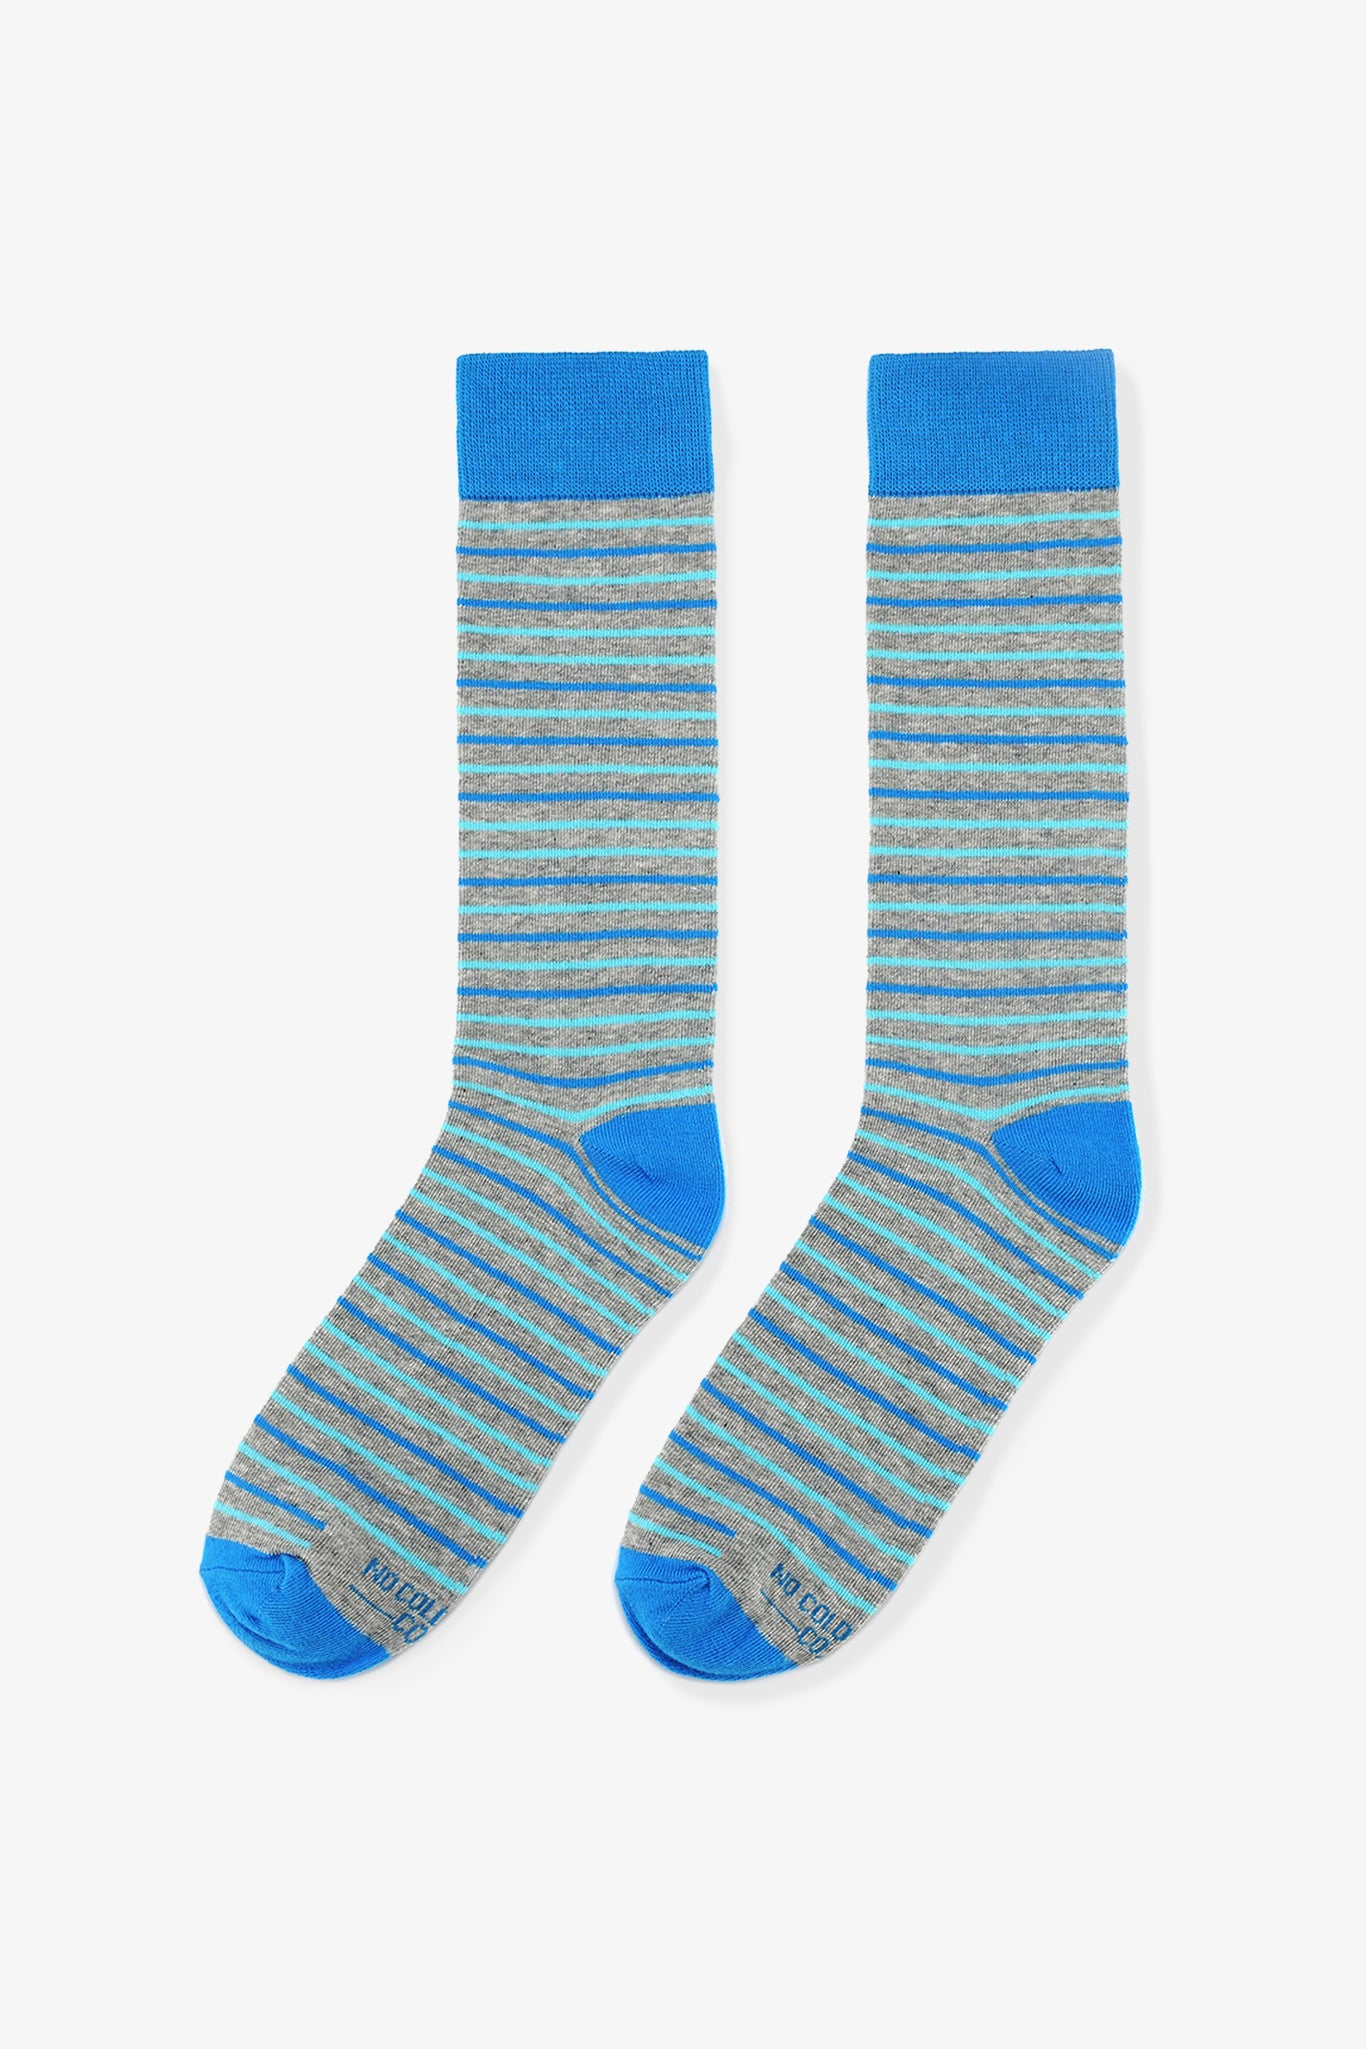 Blue Teal and Grey Striped Groomsmen Socks by No Cold Feet